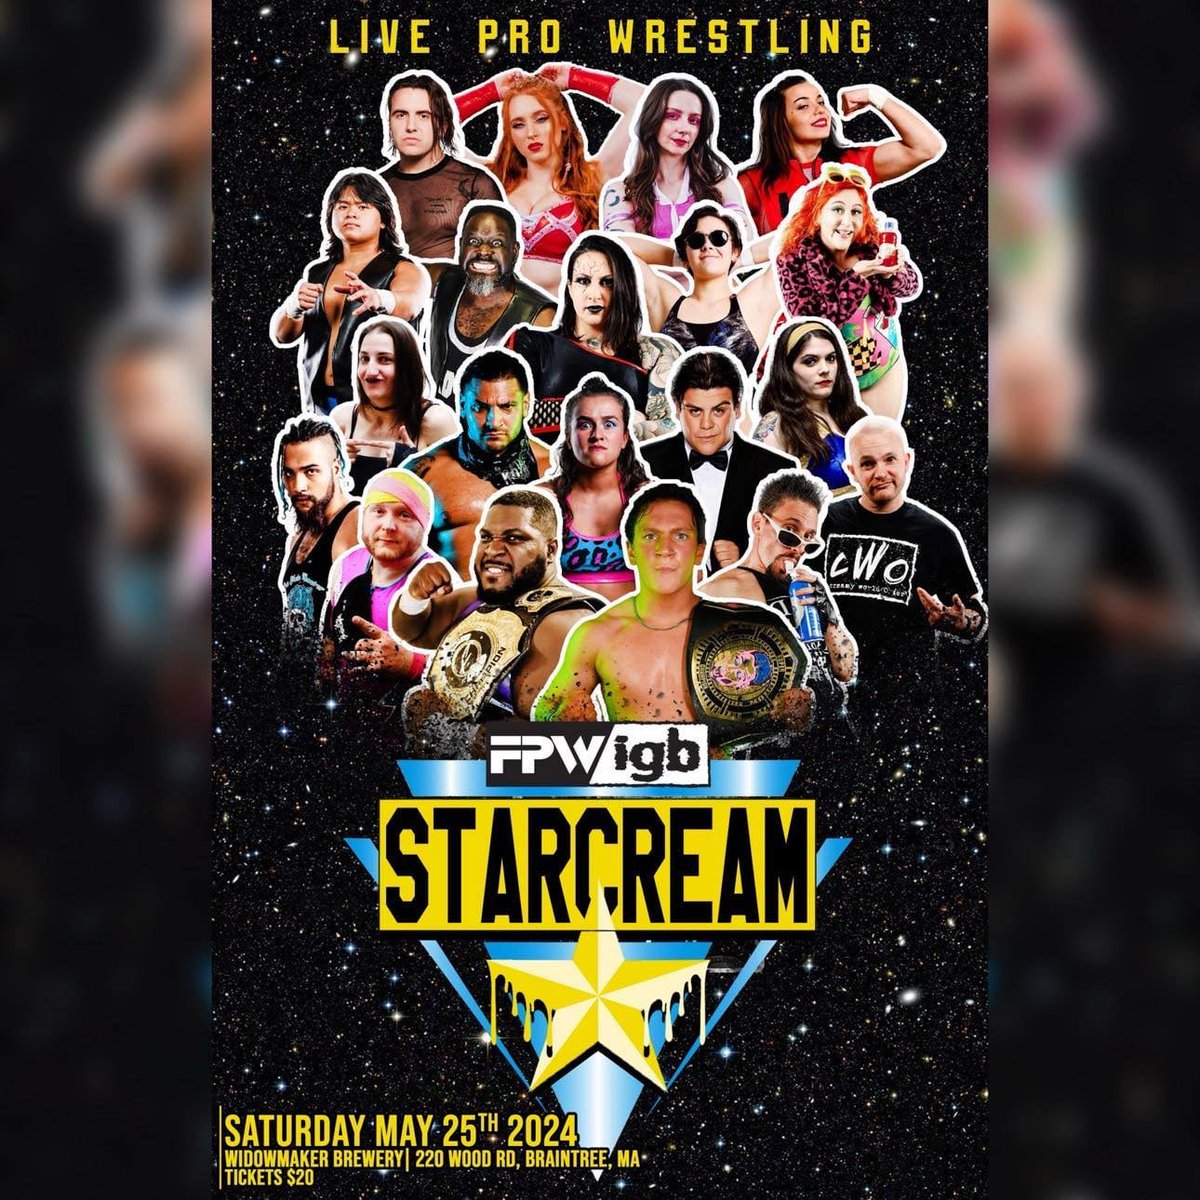 BE THERE WHEN FOCUS PRO & IGB TAKE OVER WIDOWMAKER BREWING!!! Featuring Former WWE Superstar Ricardo Rodriguez, 9 matches including 2 Title Matches! Focus Pro/ @IGBonanza Saturday MAY 25th! @WidowmakerBrew 220 Wood Rd - Braintree, MA Tickets 🎟️ tinyurl.com/FPWIGBStarCream